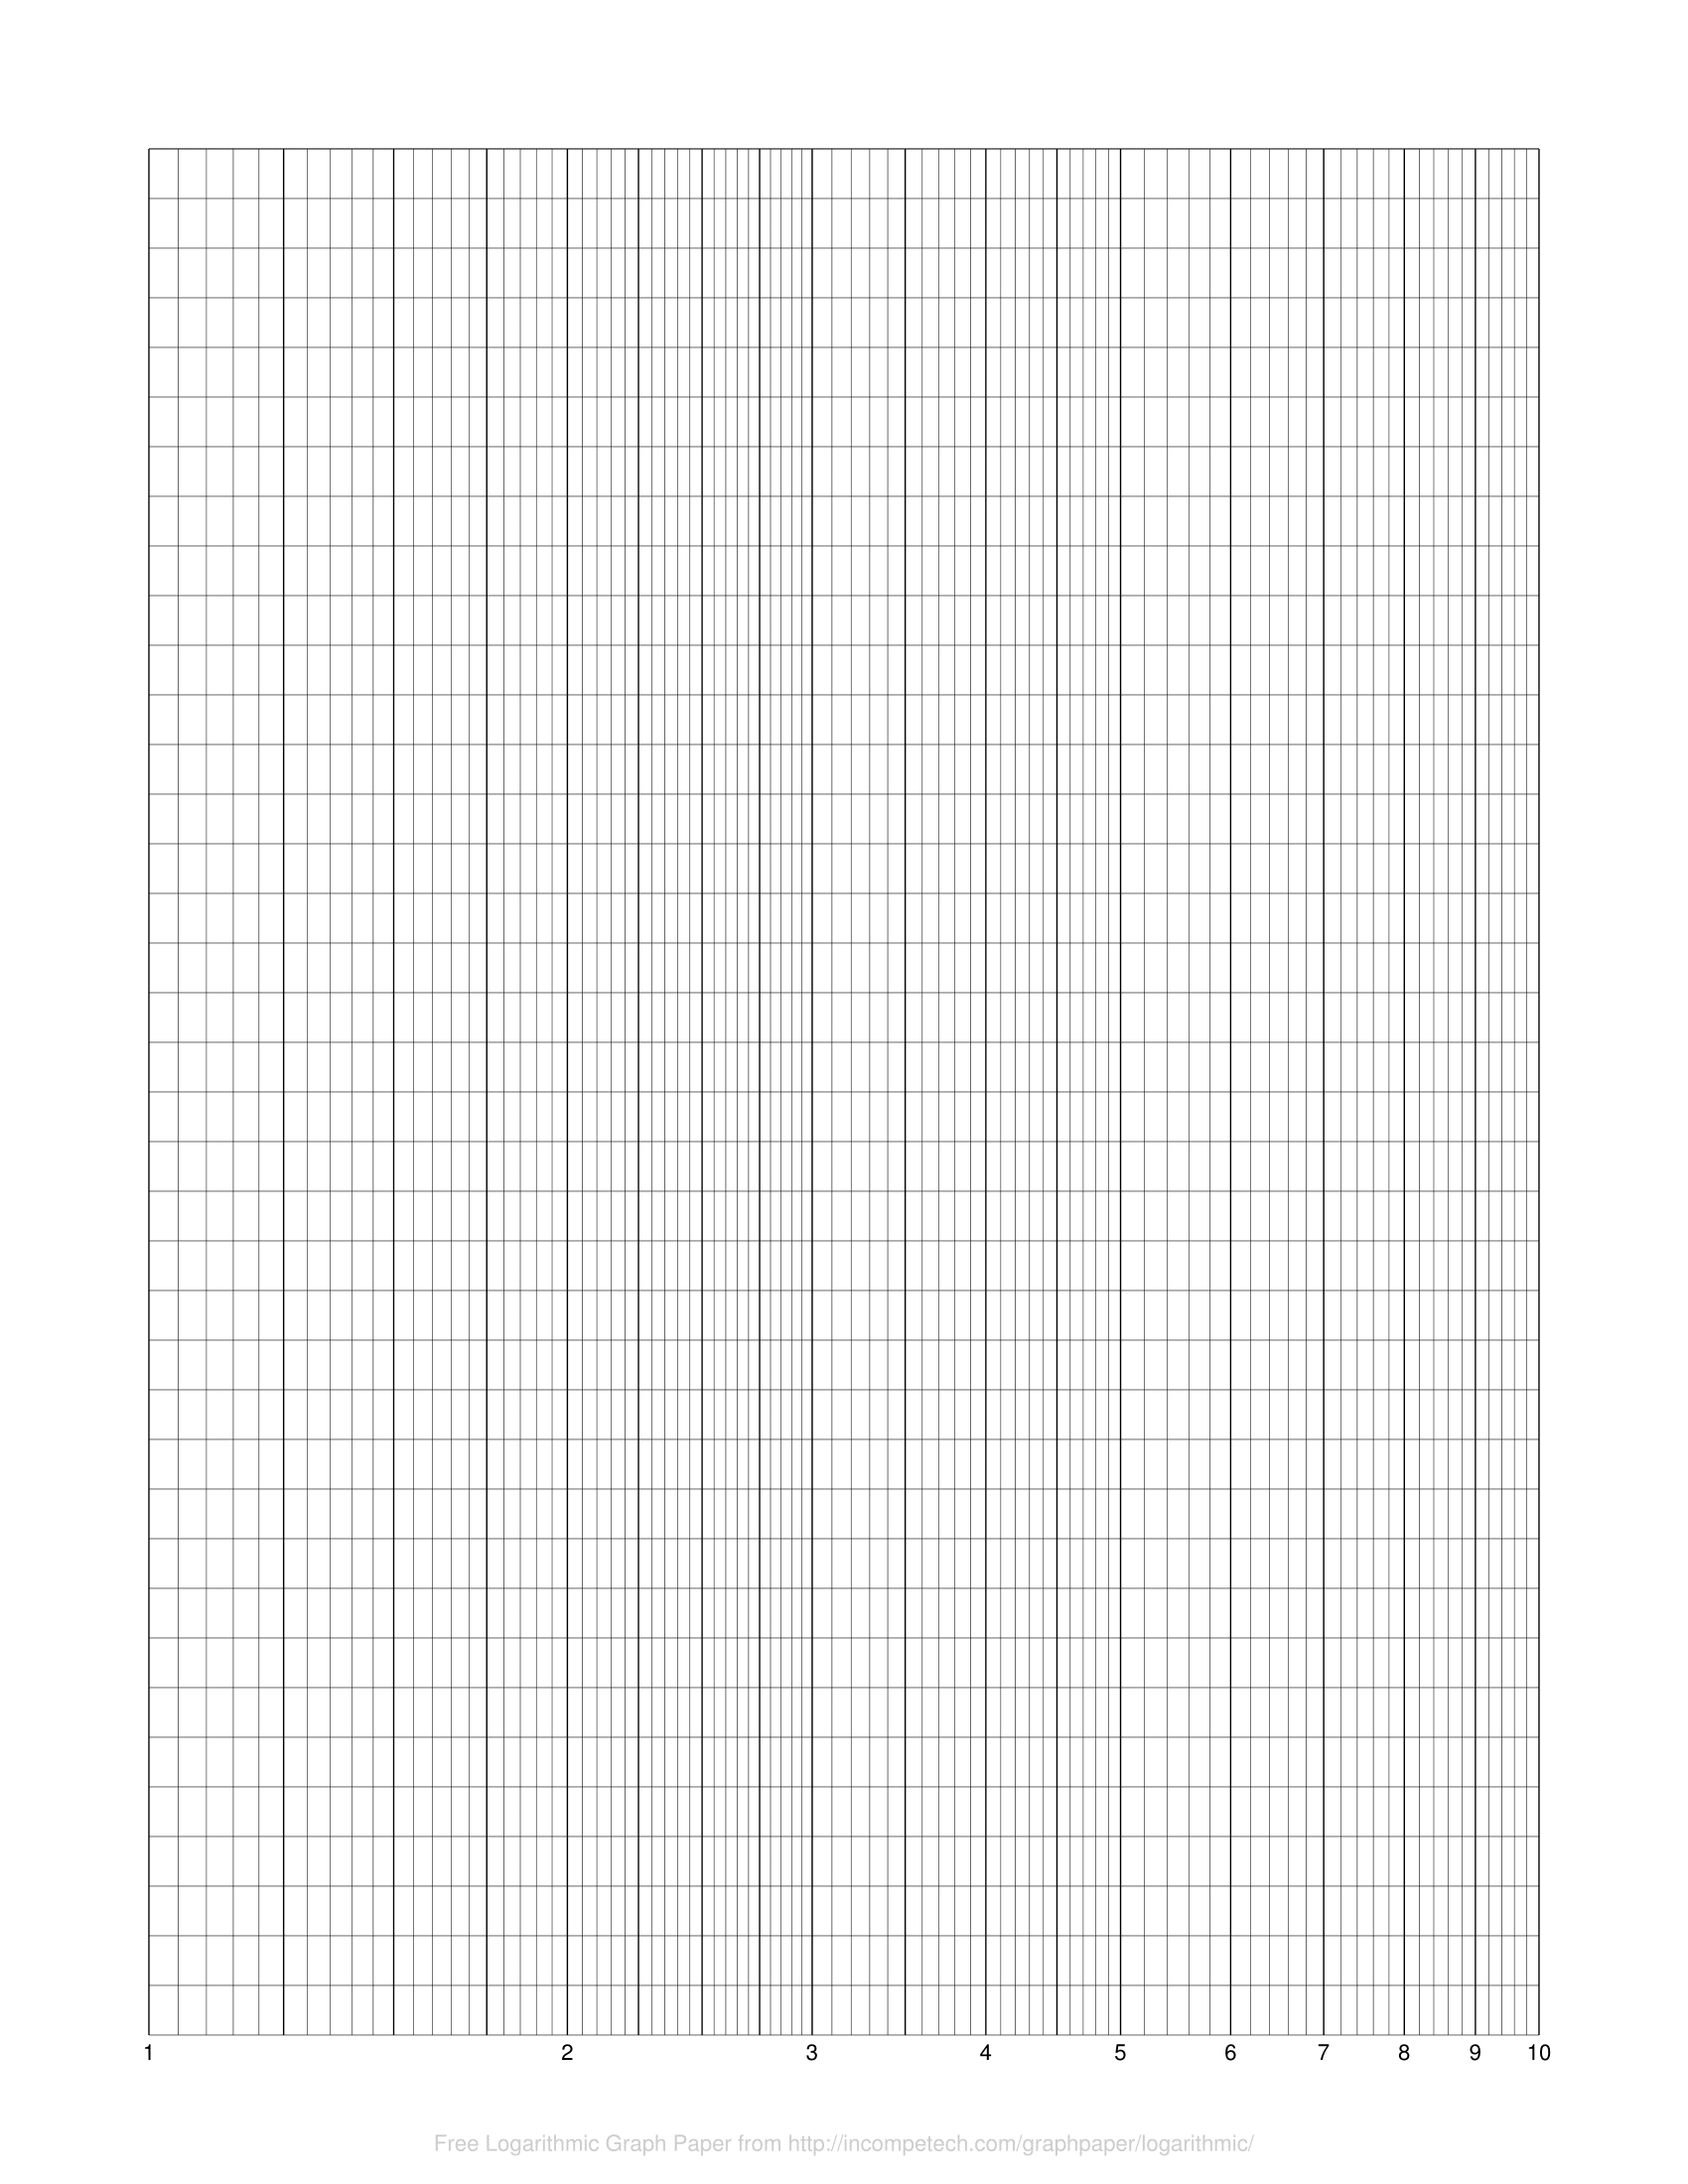 Free Online Graph Paper / Logarithmic